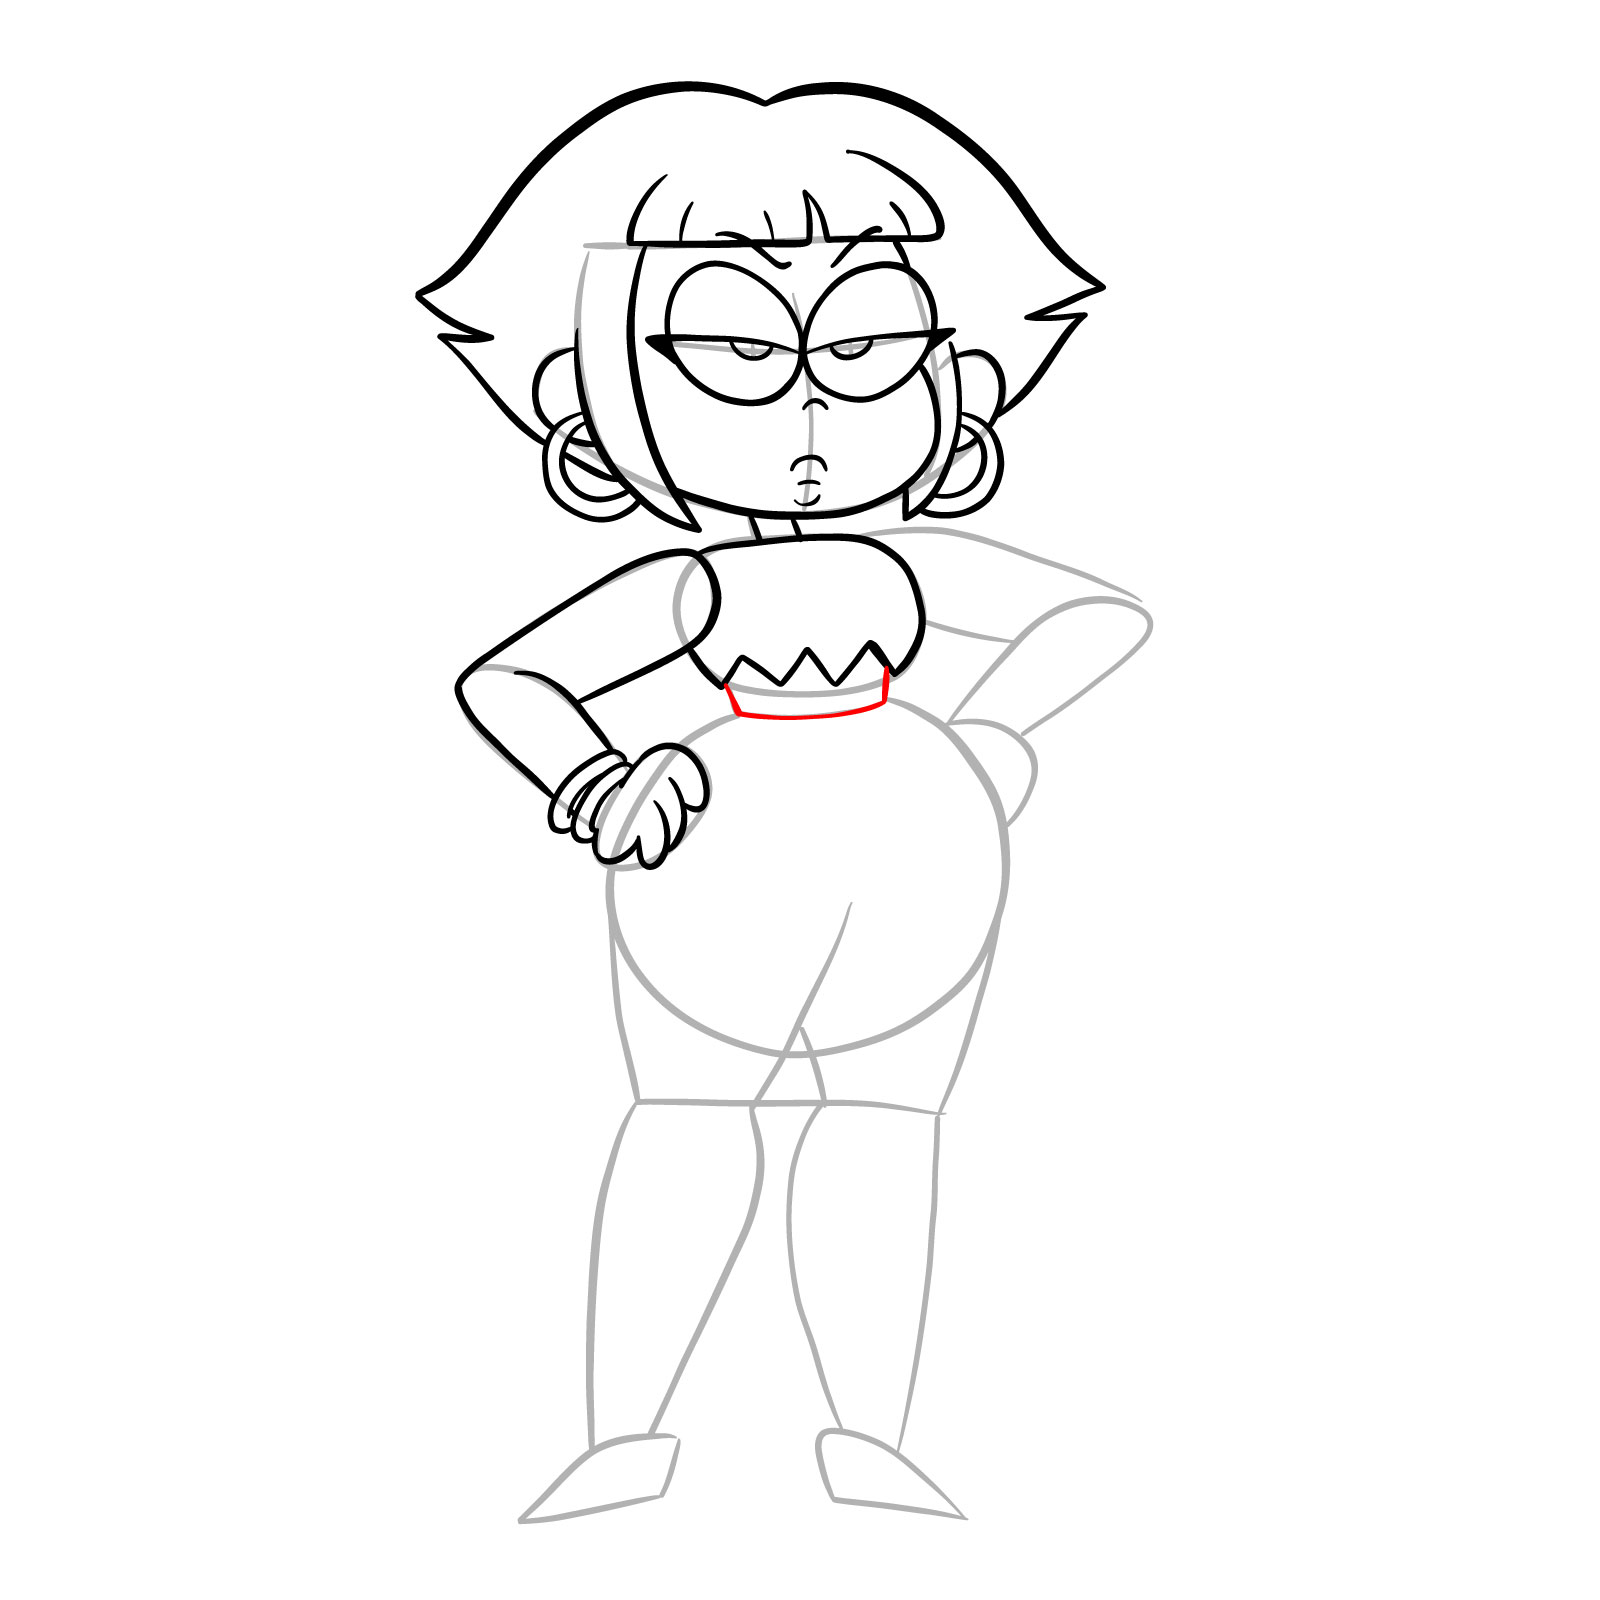 How to draw Human Shannon from OK K.O.! - step 20